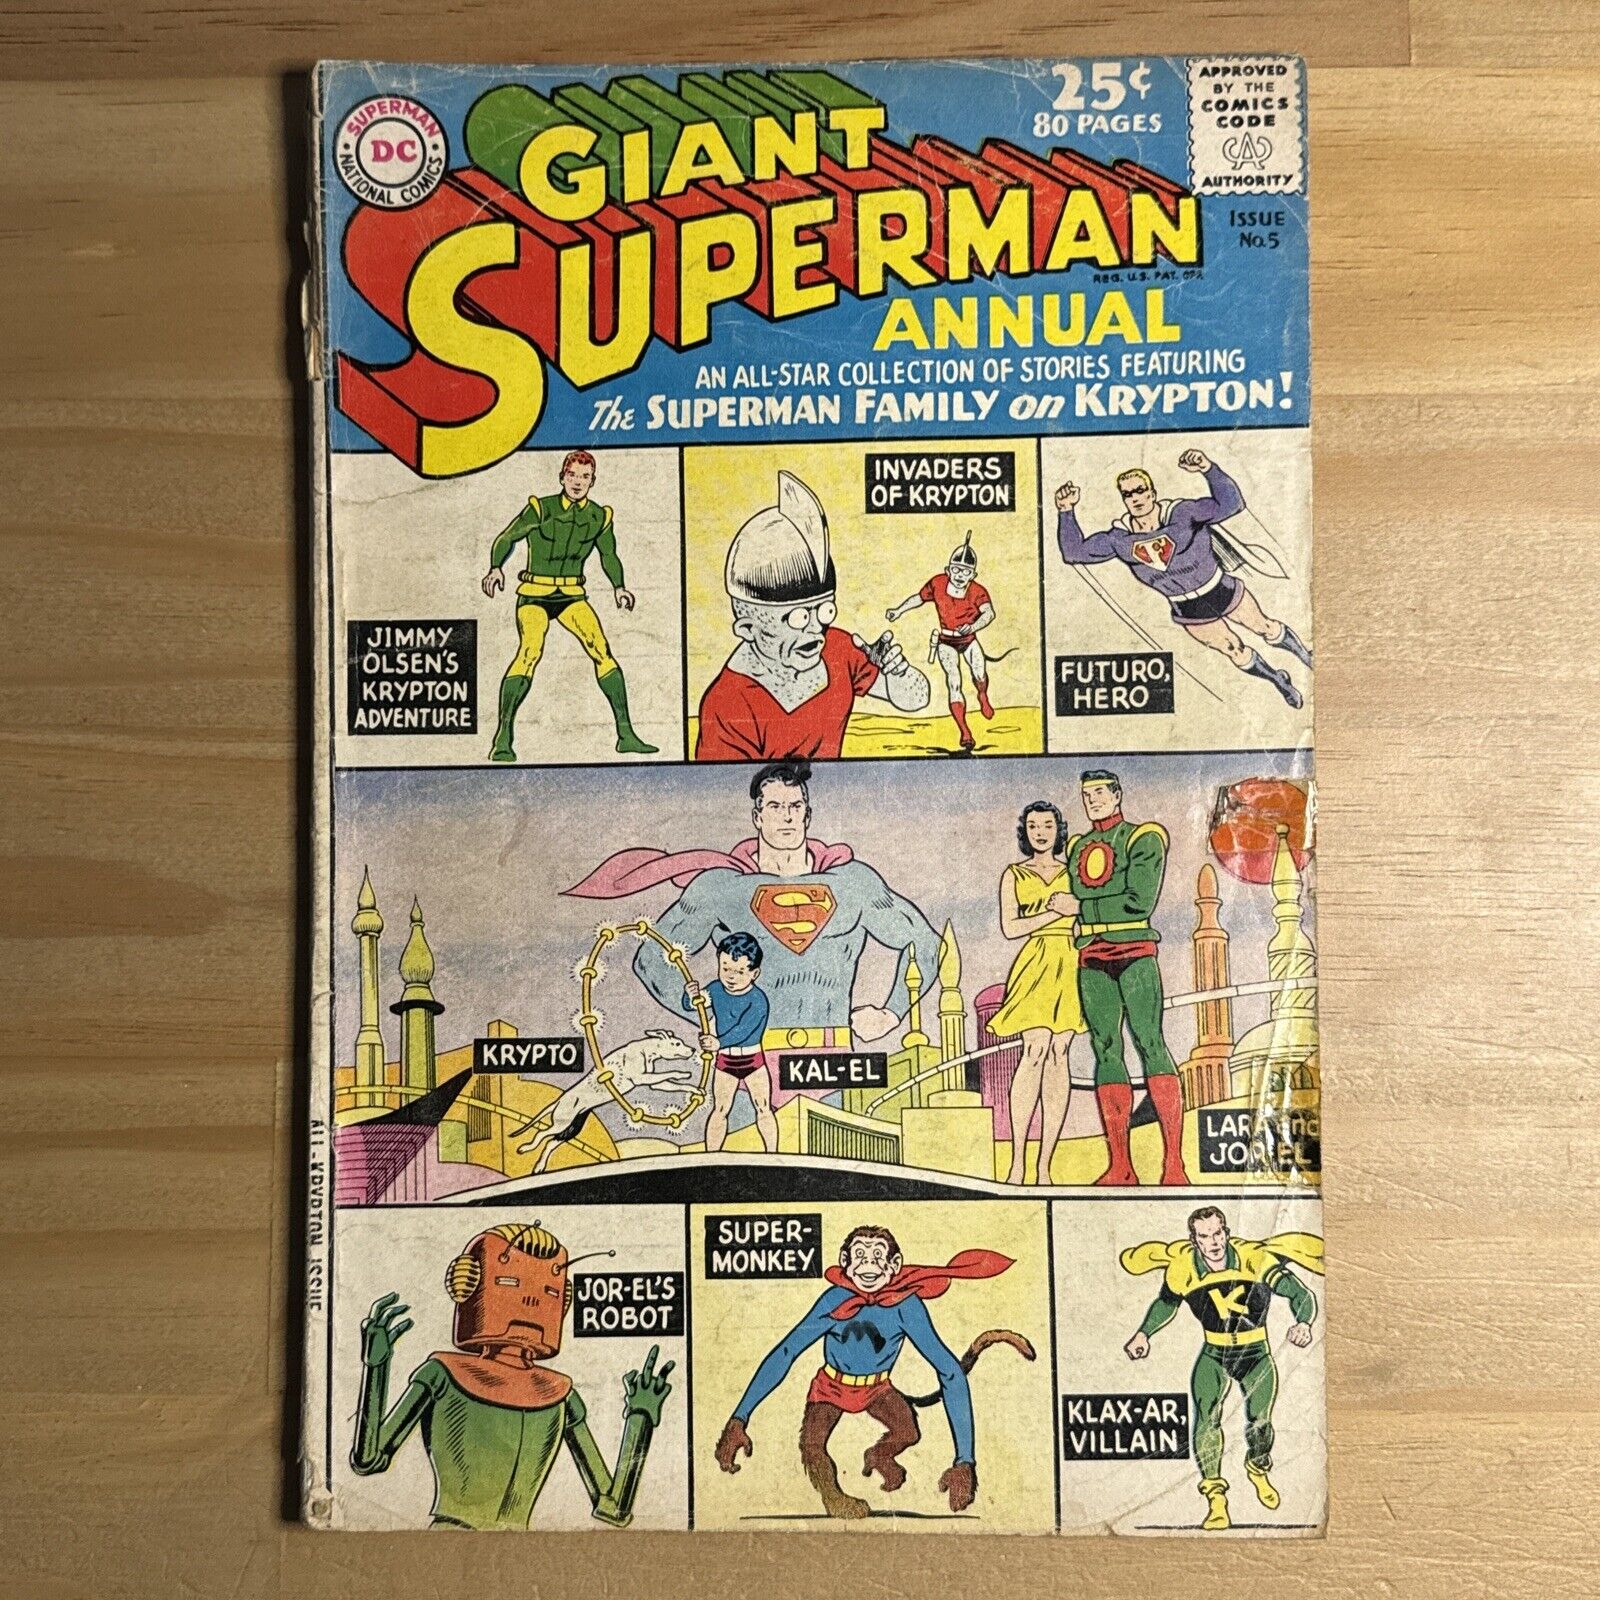 GIANT SUPERMAN ANNUAL ISSUE No. 5